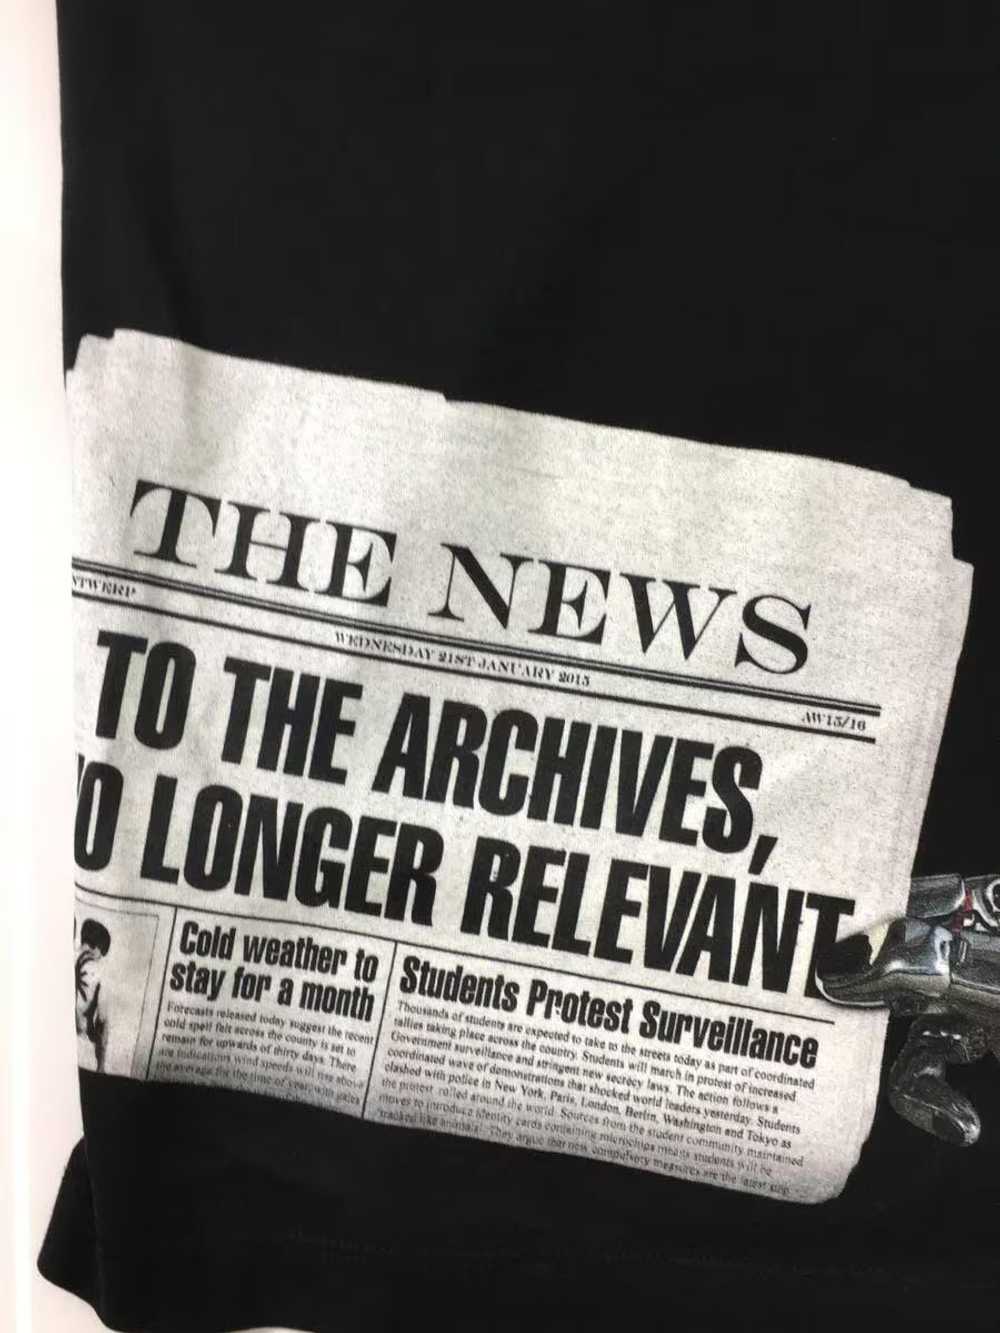 Raf Simons "TO THE ARCHIVES" Tee - image 8